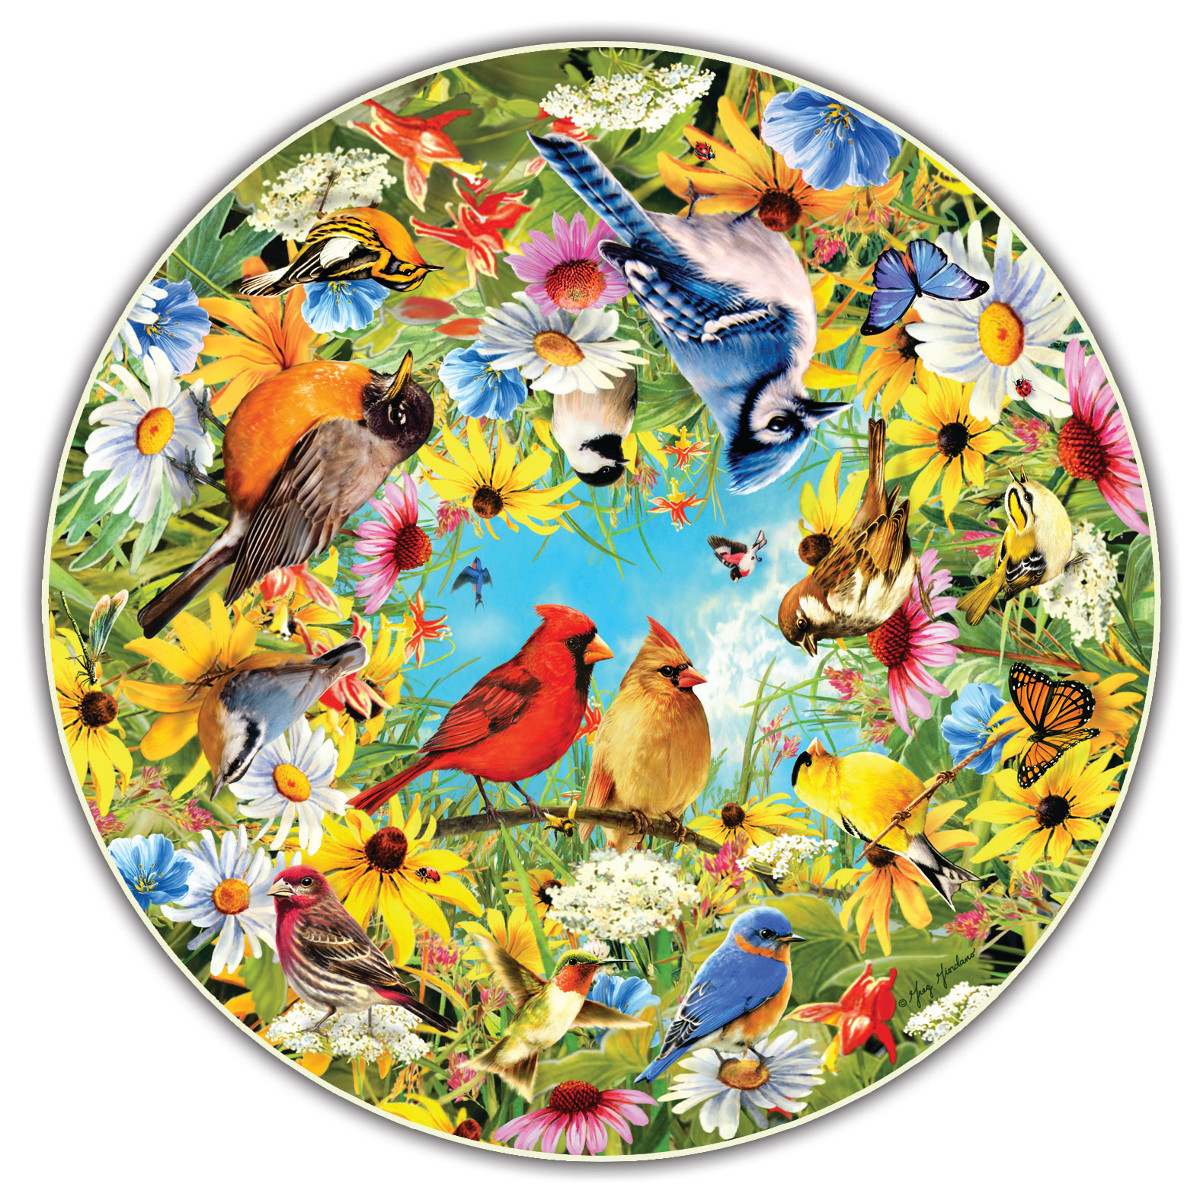 Backyard Birds (Round Table Puzzle) - Scratch and Dent Jigsaw Puzzle